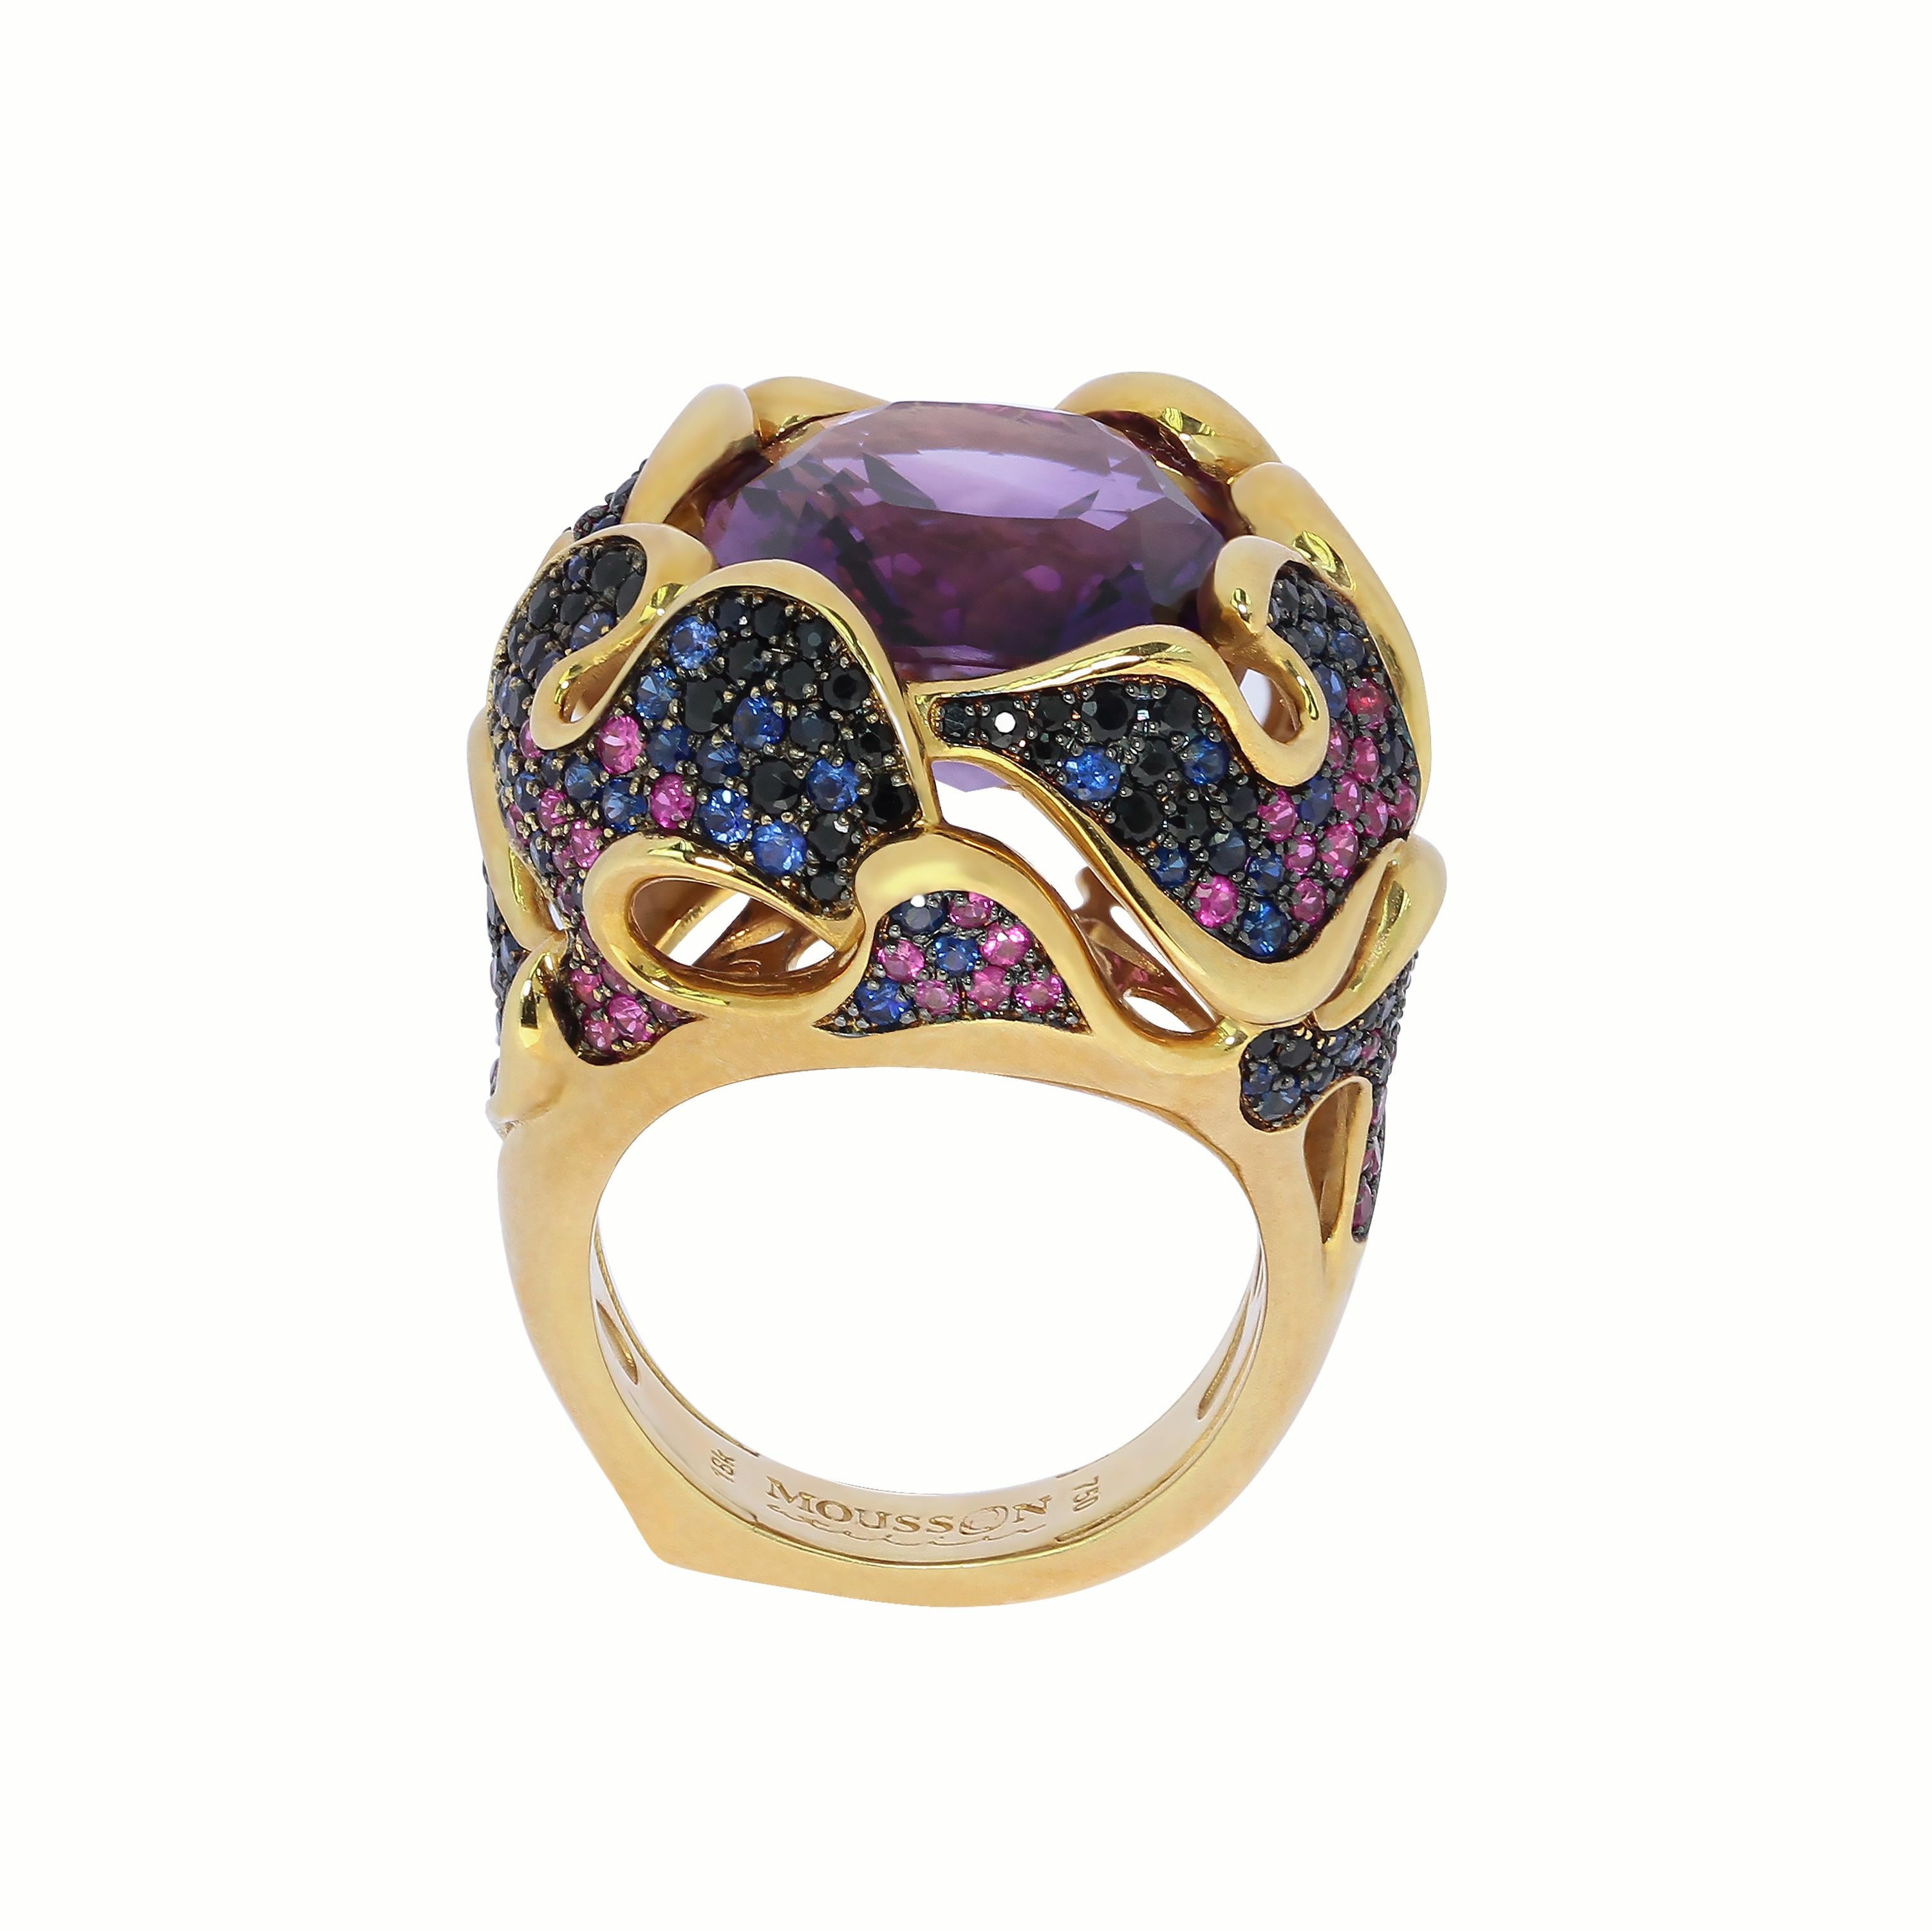 Amethyst 11.87 Carat Pink Blue Black Sapphire 18 Karat Yellow Gold Ring
In early June in the gardens bloom luxurious flowers - peonies. Romance and mystery of peonies always attracted and allured artists. Our designers created this Ring, inspired by